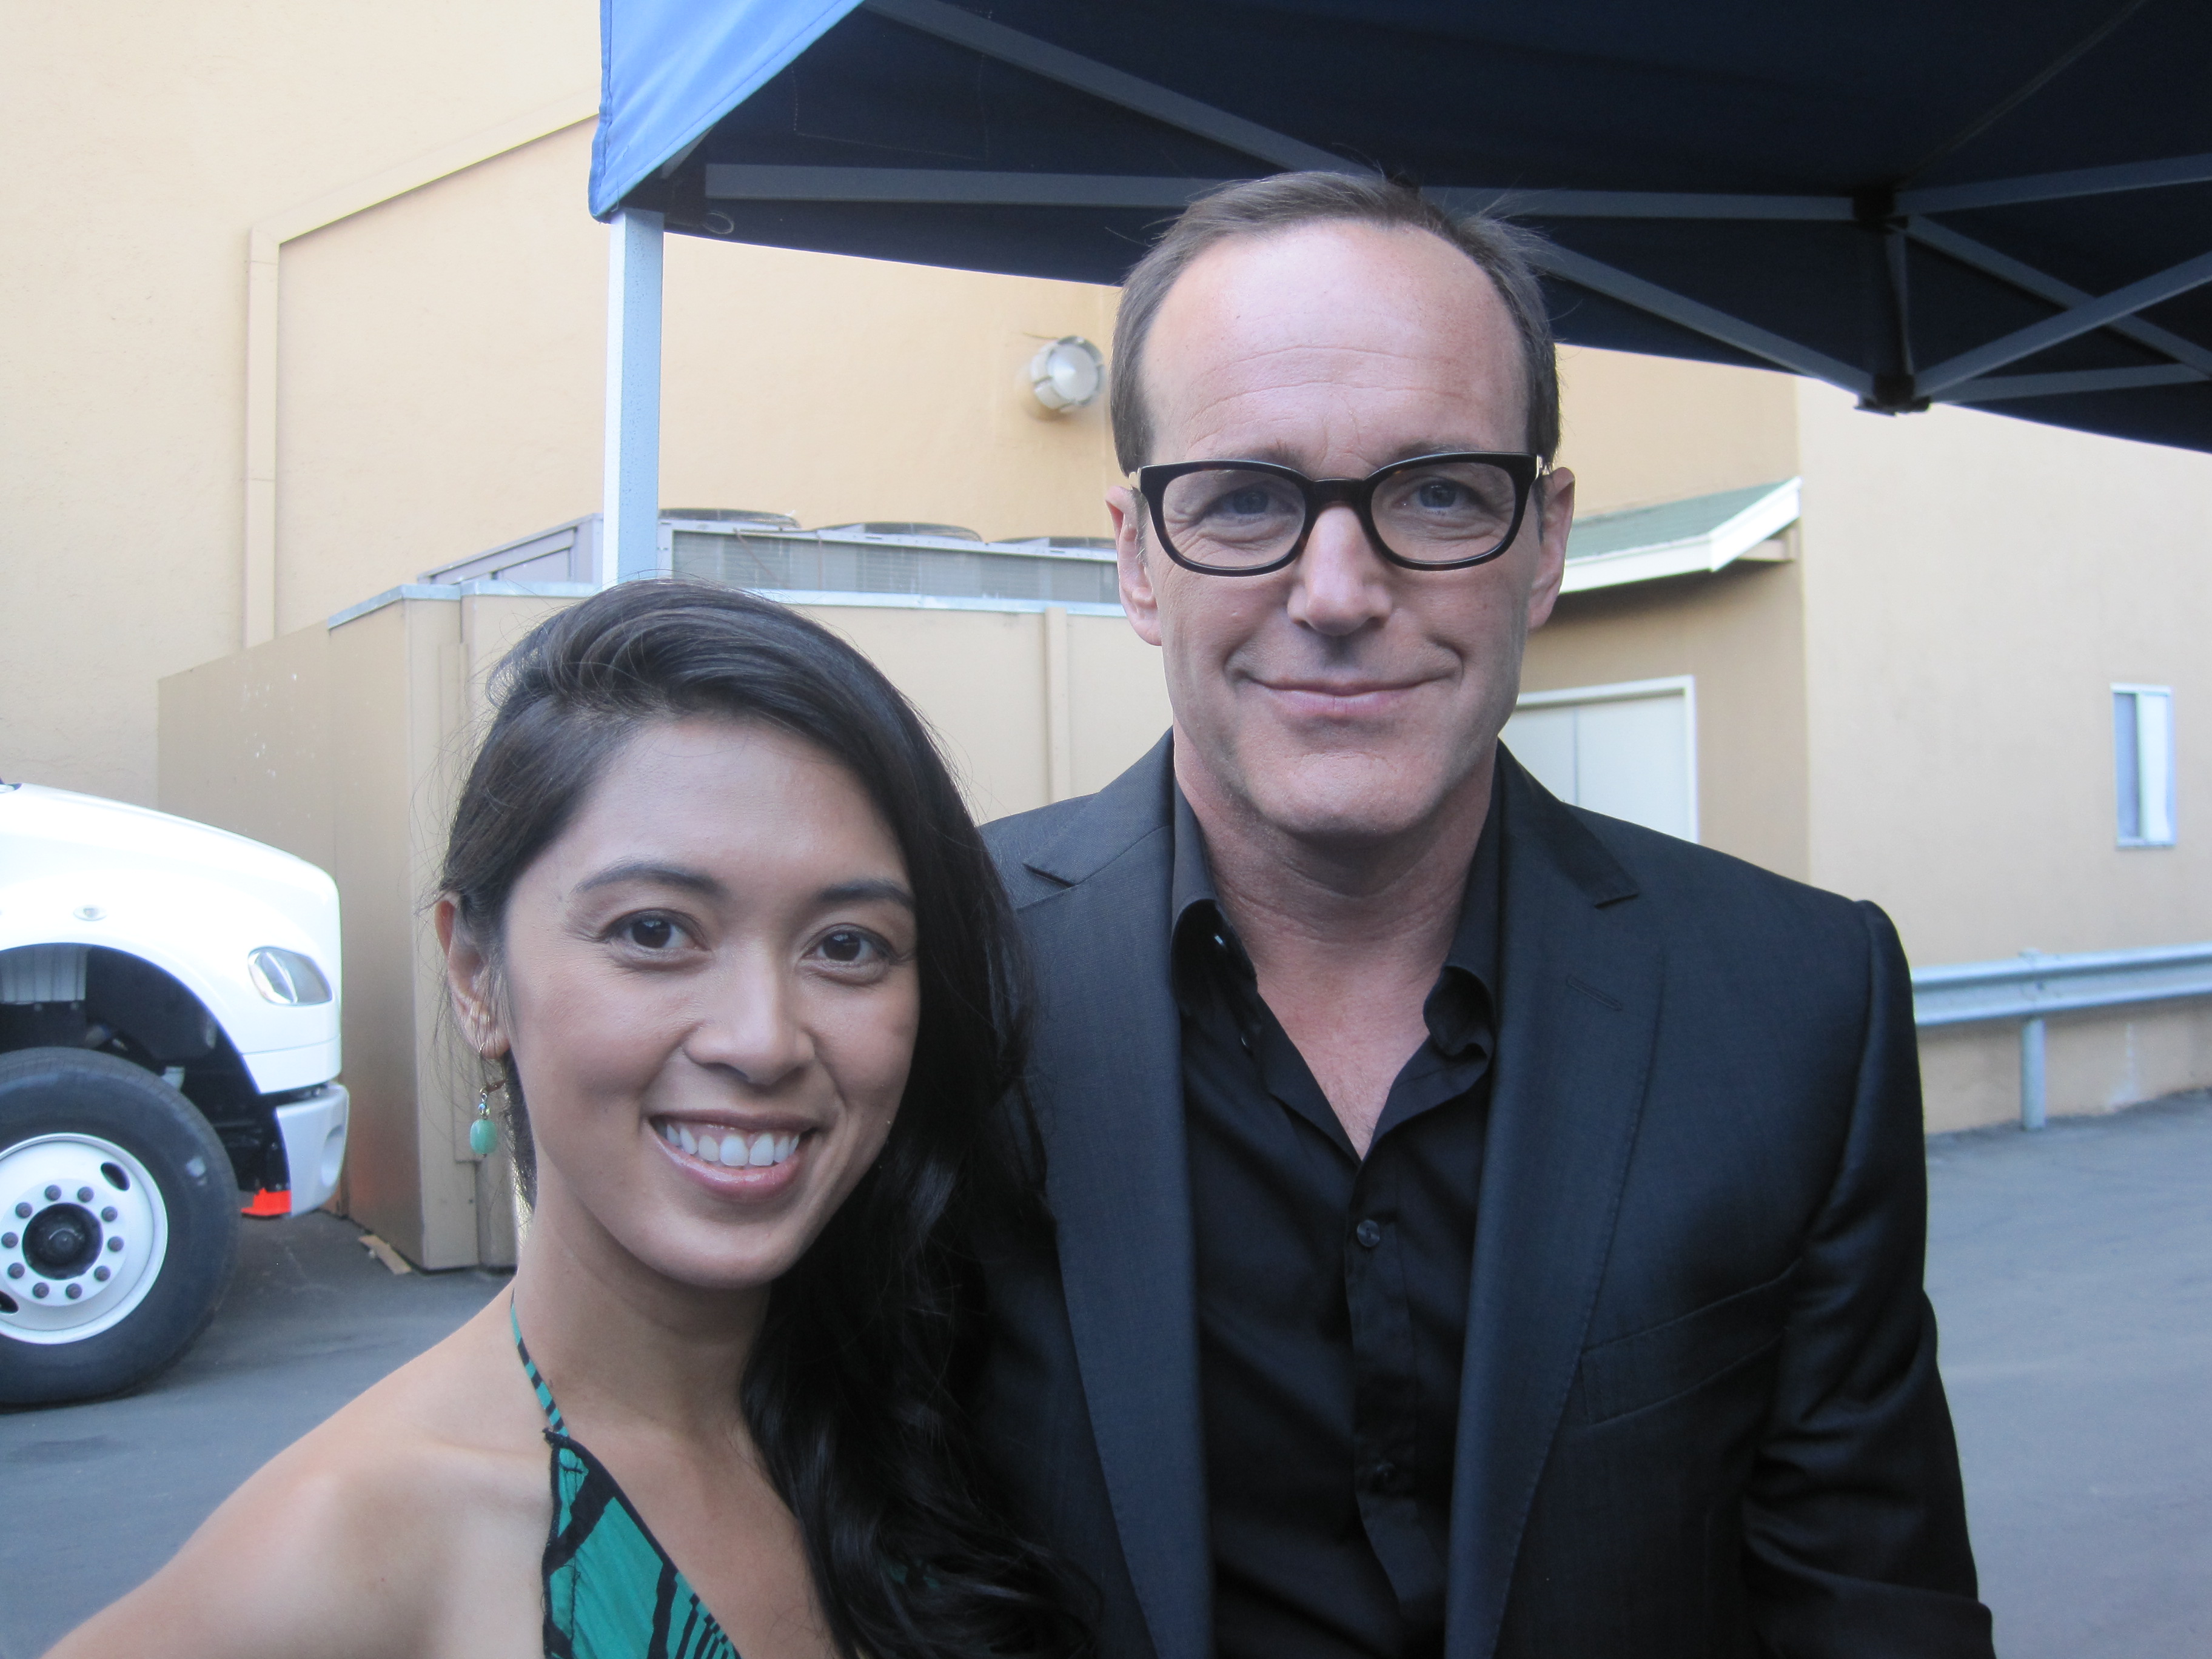 With Clark Gregg on Agents of SHIELD